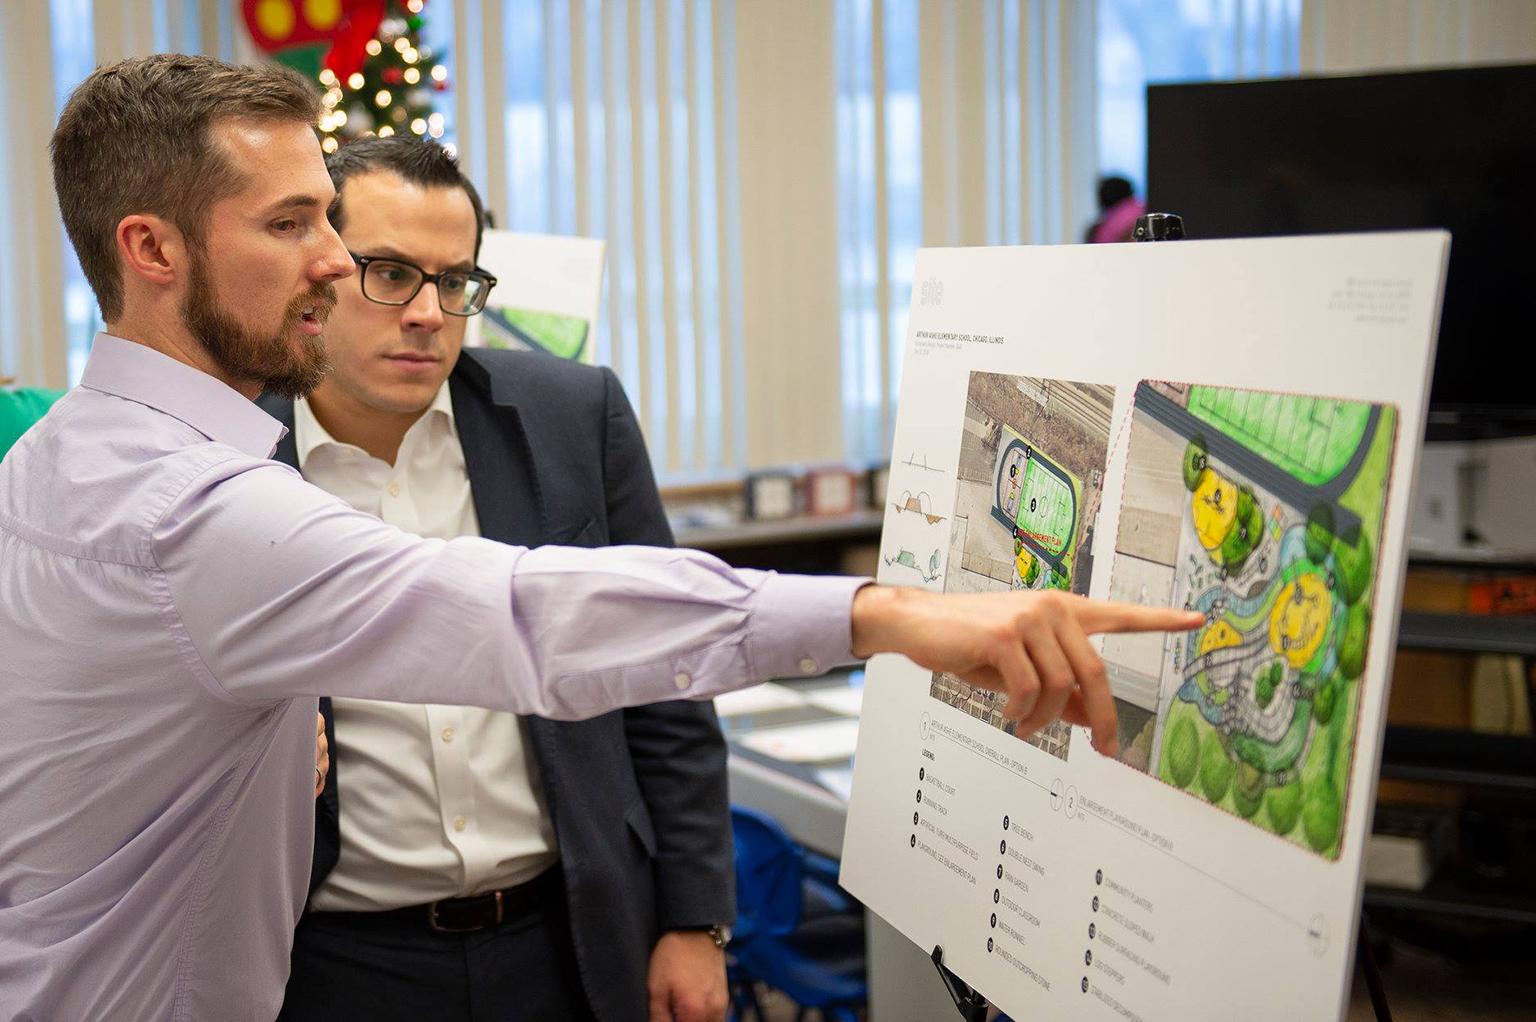 Project Manager Justin Rossman of Site Design Group explains the highlights of Ashe Elementary School’s planned garden to Dean Alonistiotis, aide to MWRD Commissioner Kimberly Du Buclet. (Courtesy Metropolitan Water Reclamation District of Greater Chicago)